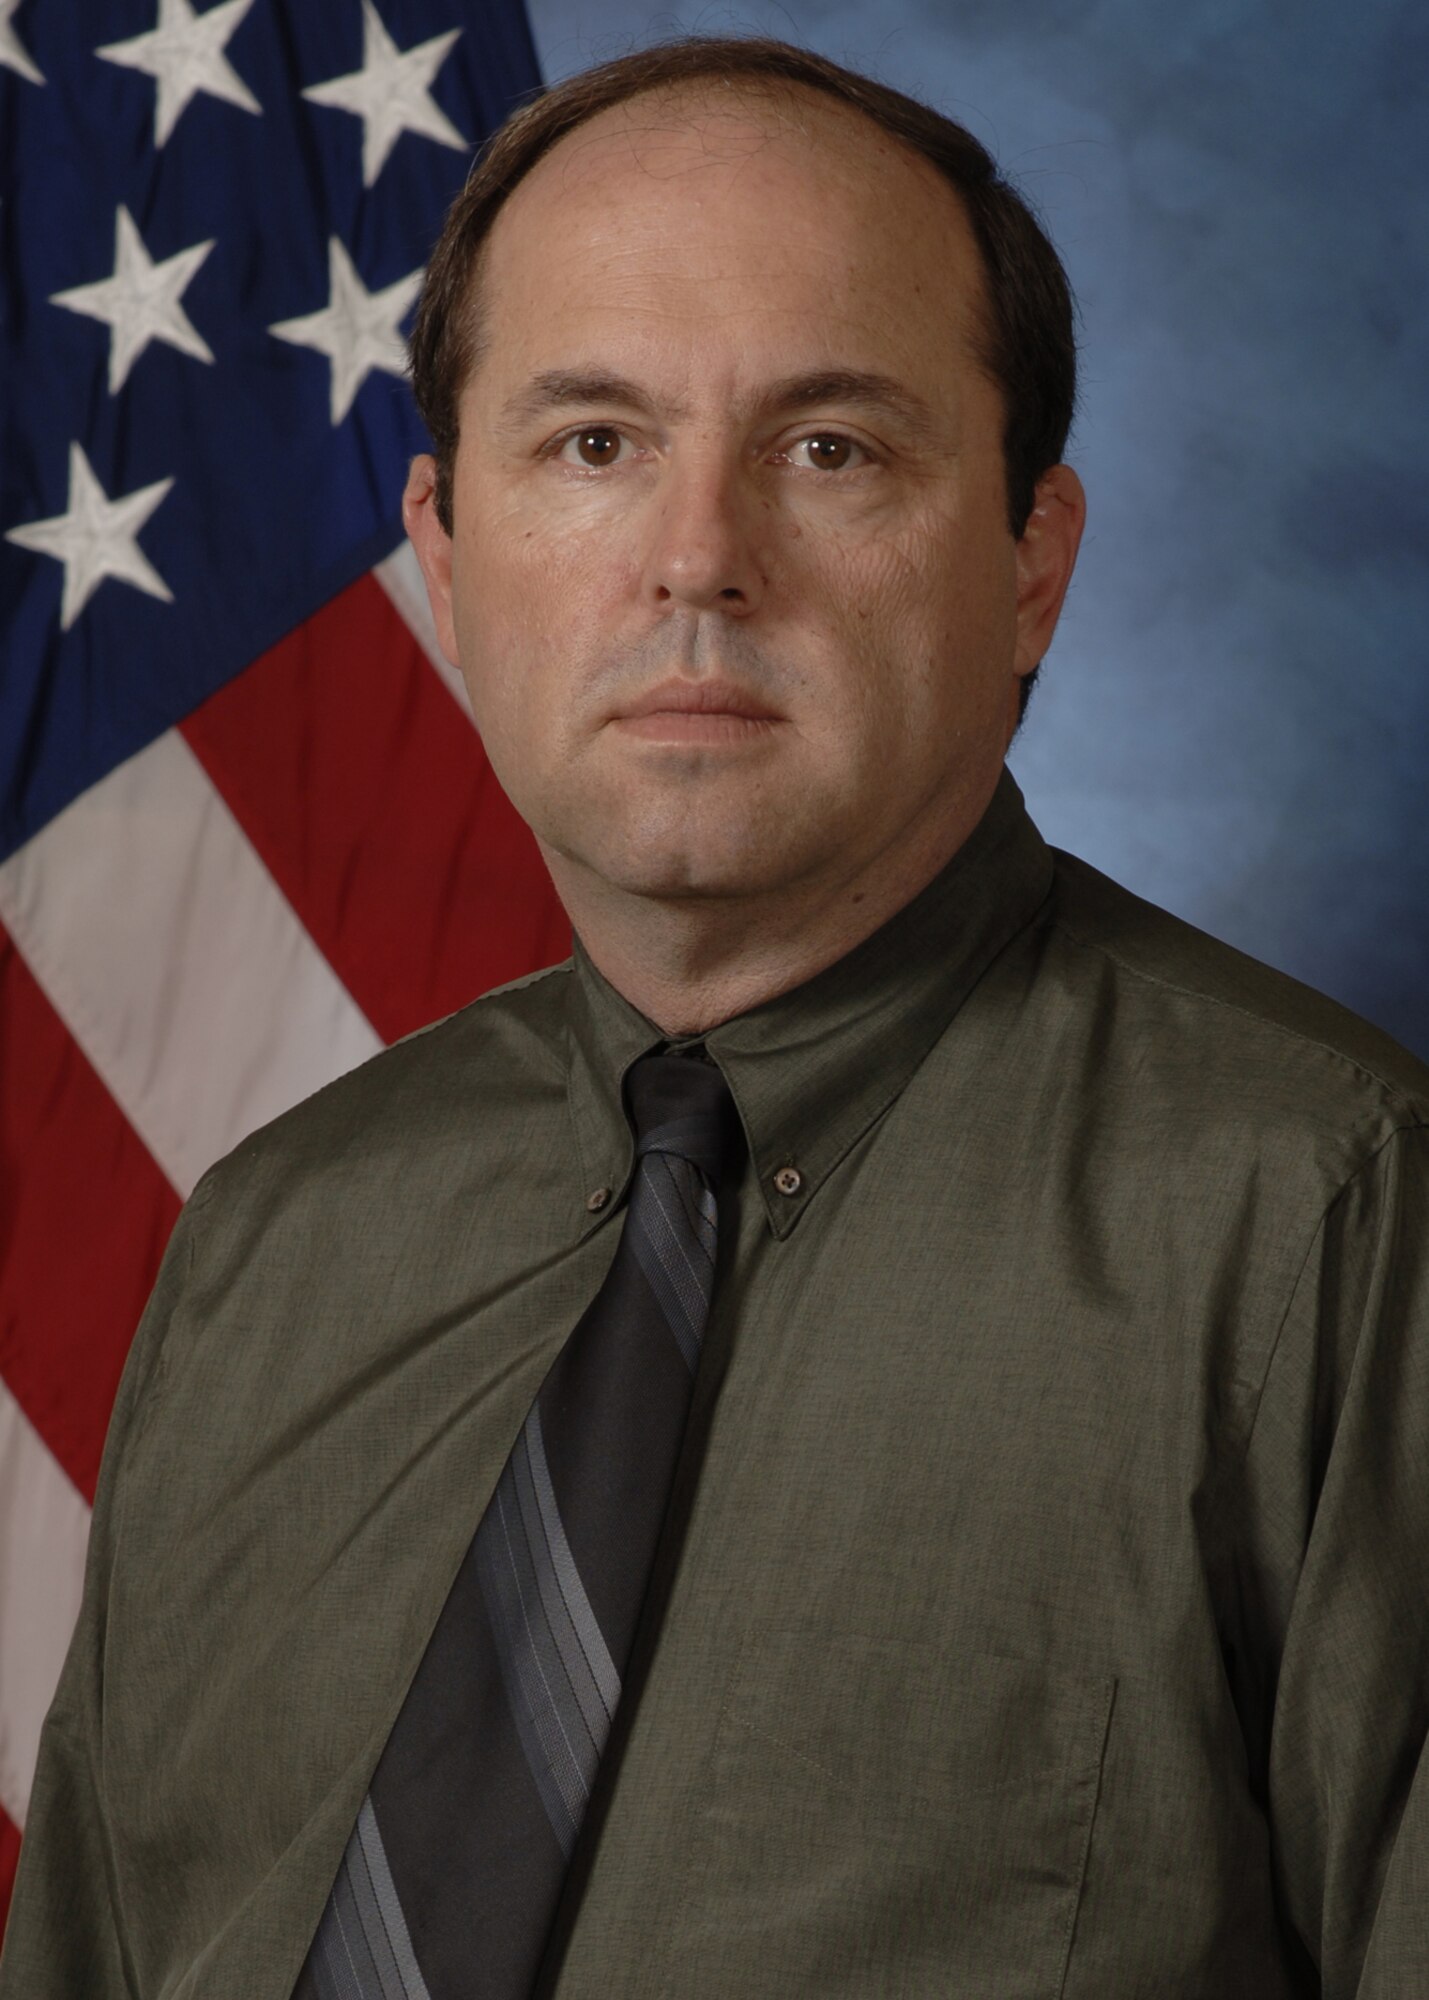 Tony Correia, an investigator with the 1st Special Operations Security Forces Squadron at Hurlburt Field, Fla., is the 2007 Air Force Special Operations Command Category 1 Civilian of the Year. (U.S. Air Force photo)